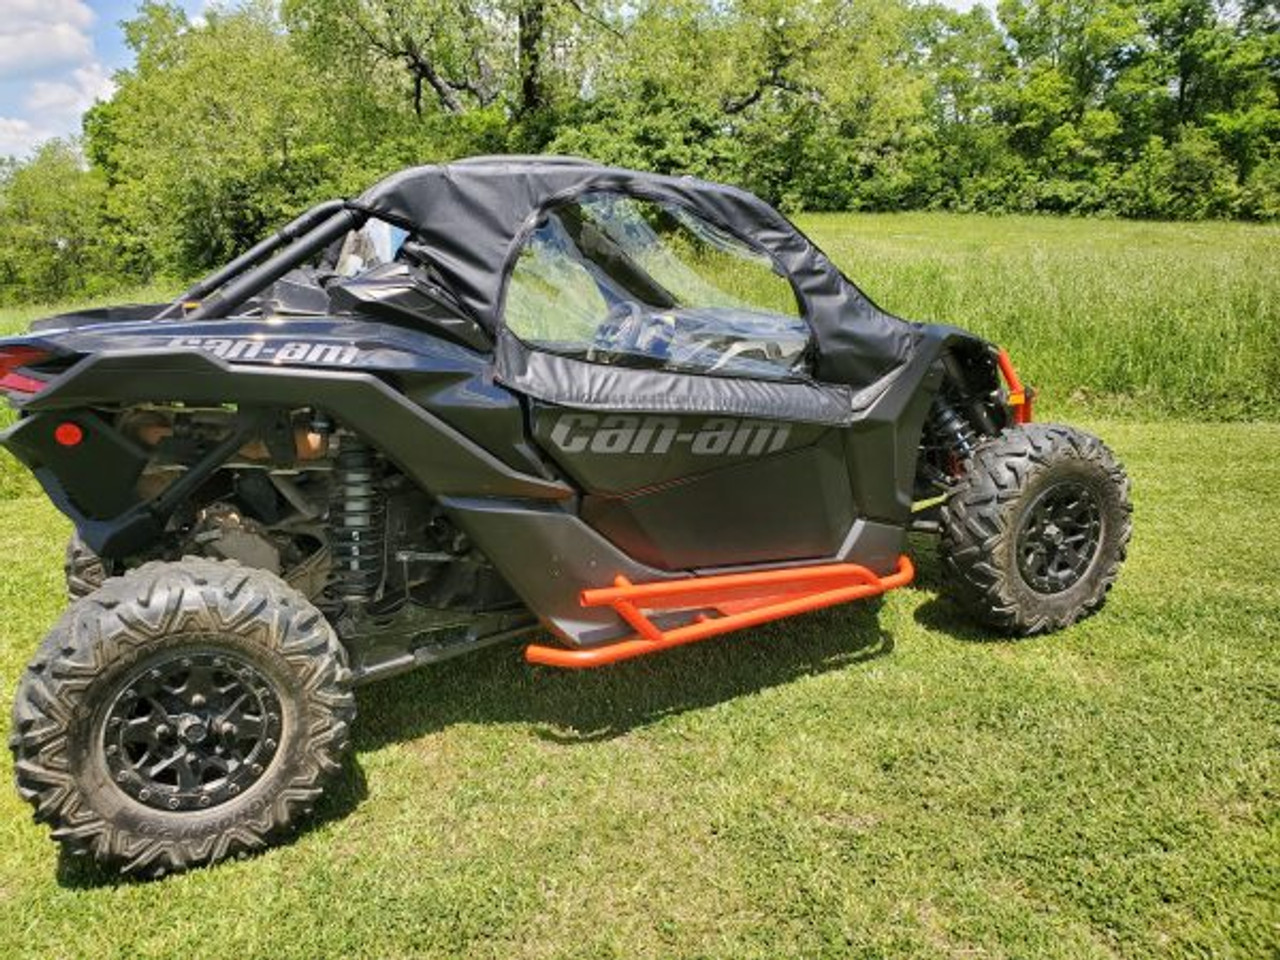 3 Star side x side can-am maverick X3 upper doors side angle view